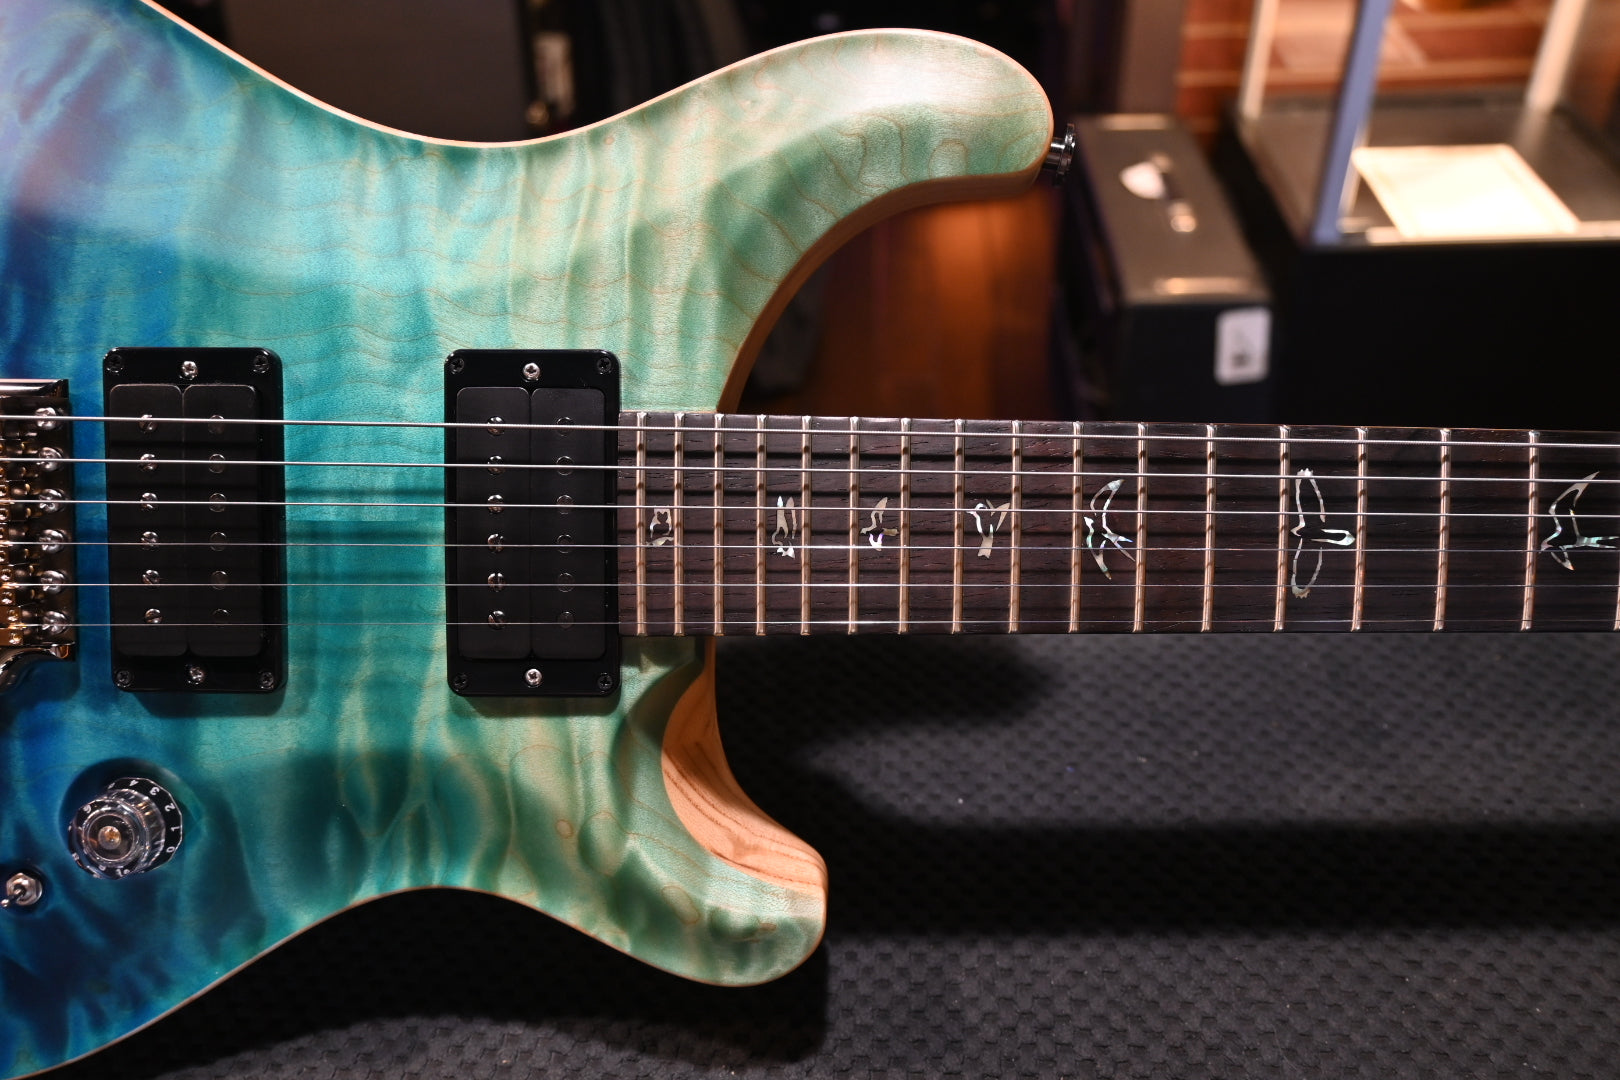 PRS Wood Library Custom 24-08 10-Top Quilt Rosewood Neck BRW - Blue Fade Satin Guitar #7532 - Danville Music